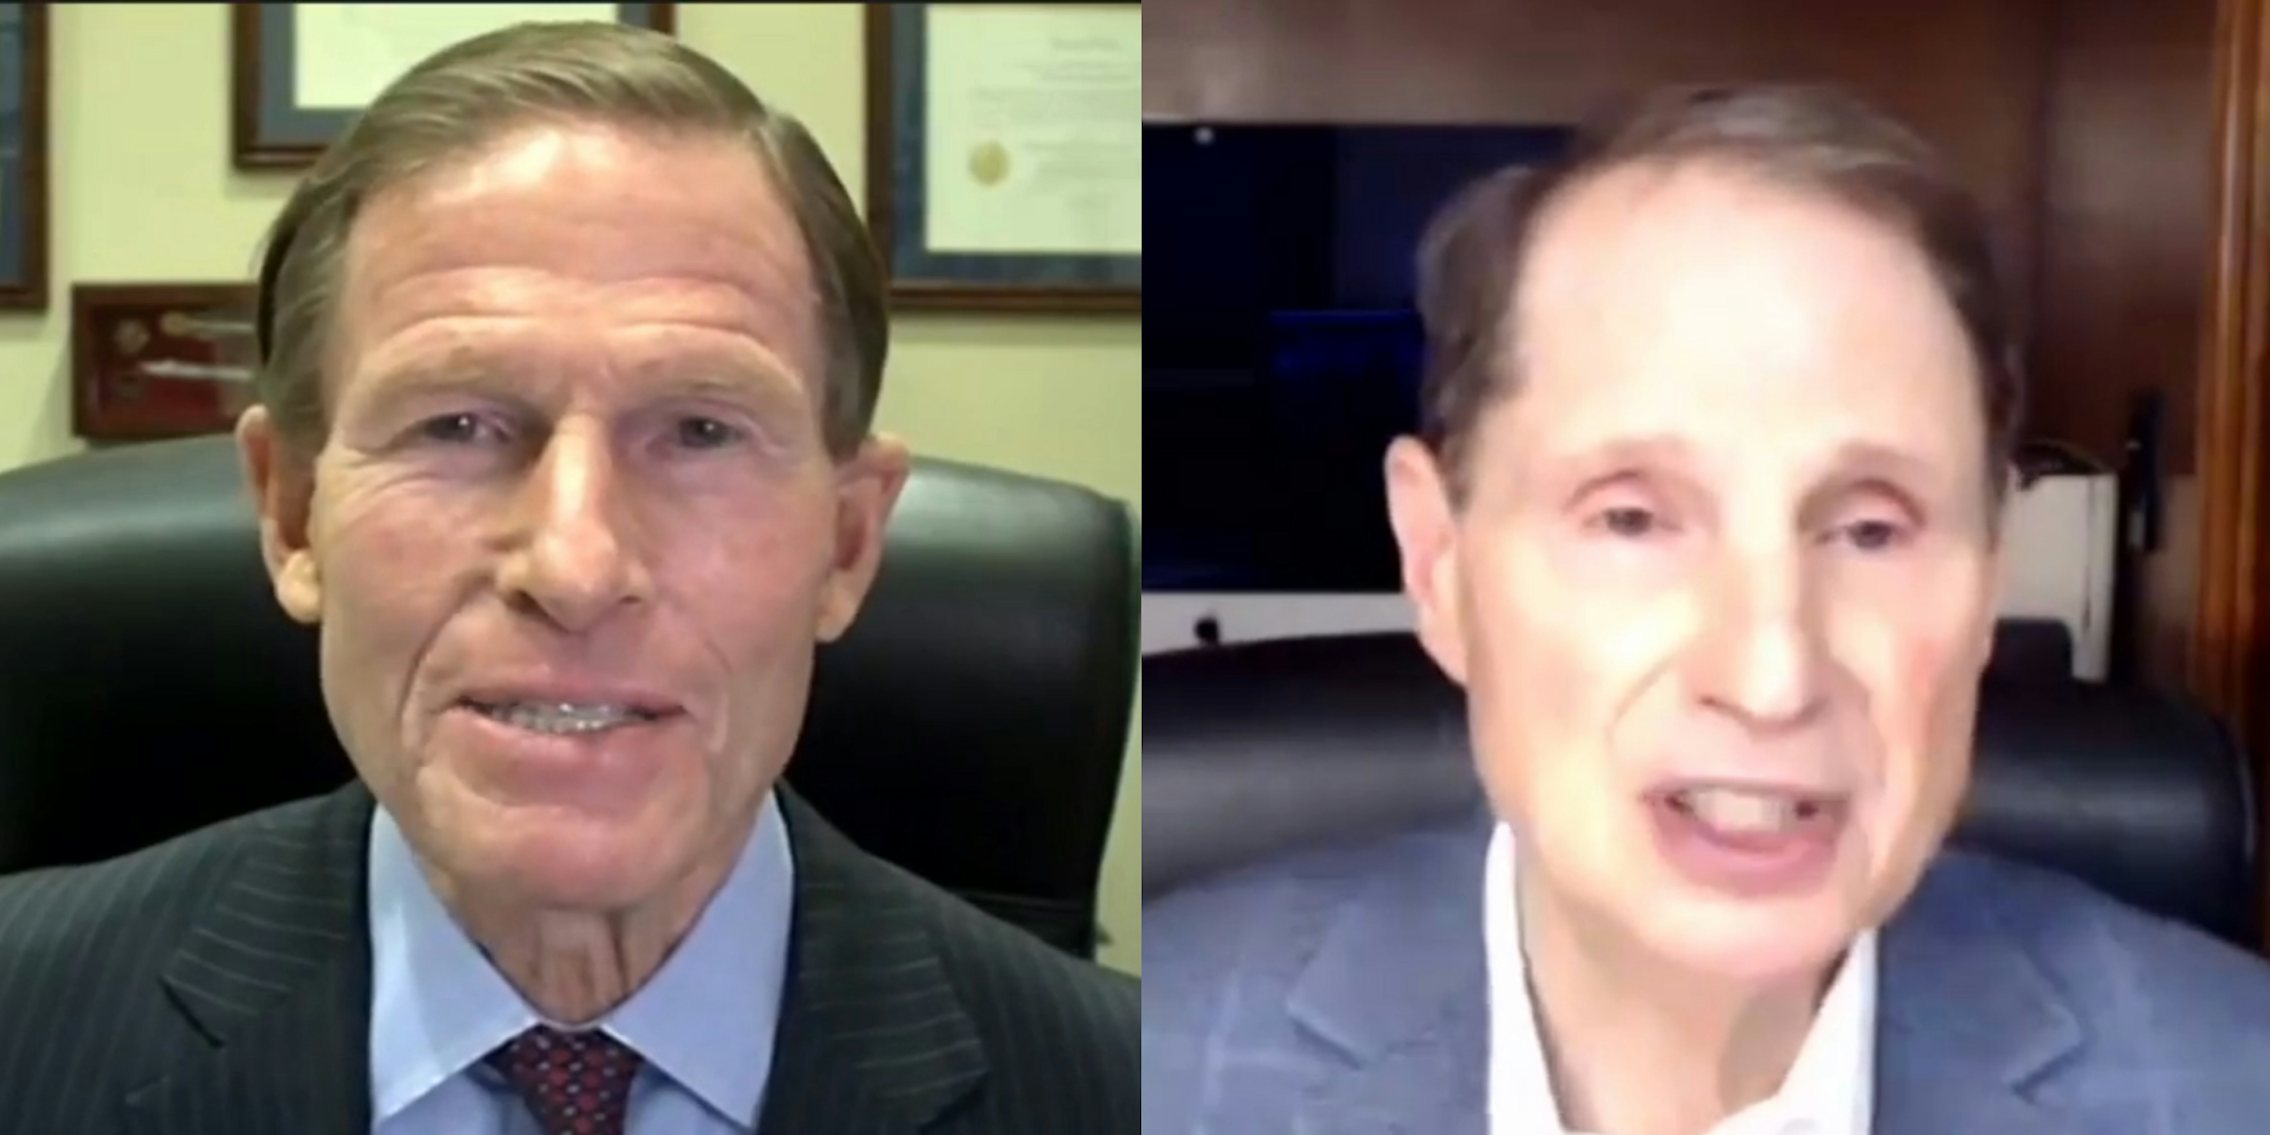 Sen. Richard Blumenthal and Sen. Ron Wyden joined tech advocates in opposing Nathan Simington being appointed to the FCC.